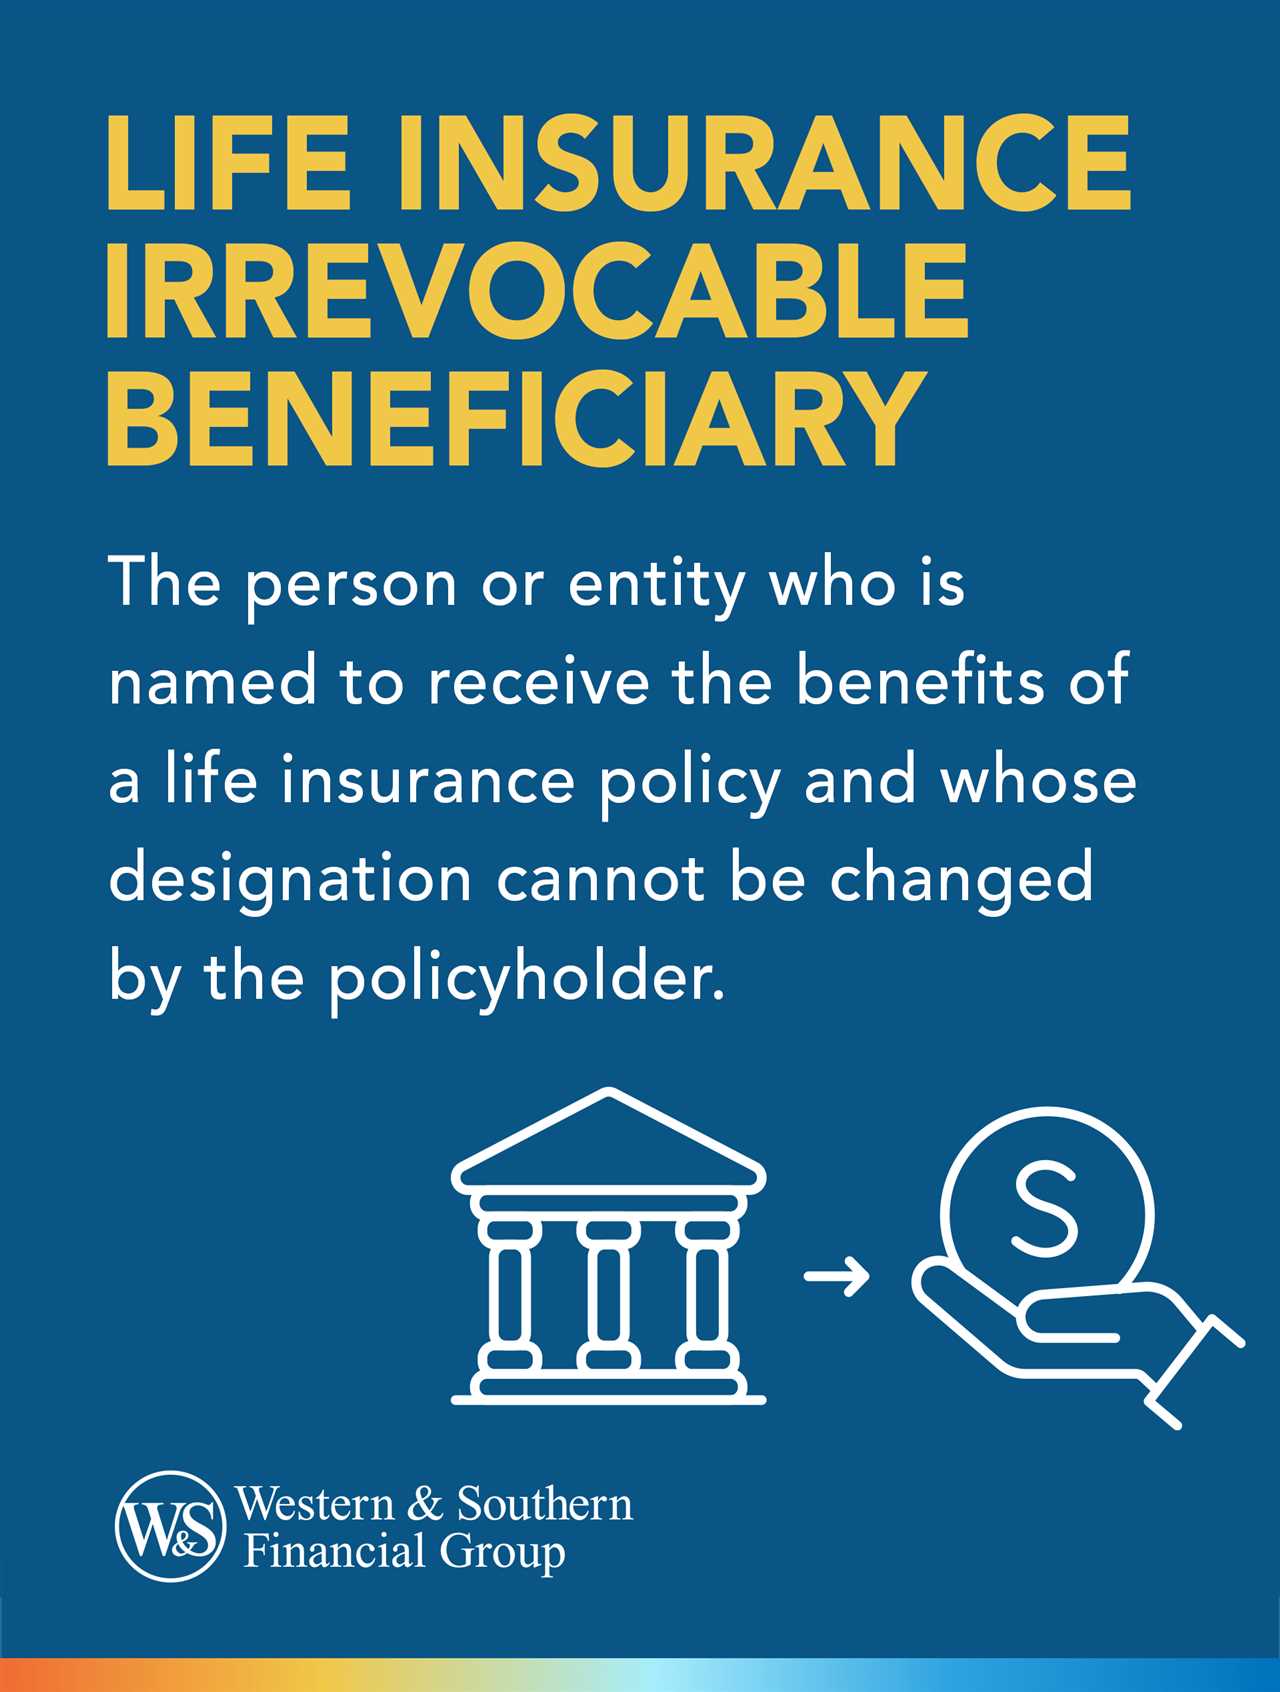 Considerations for Choosing Irrevocable Beneficiaries